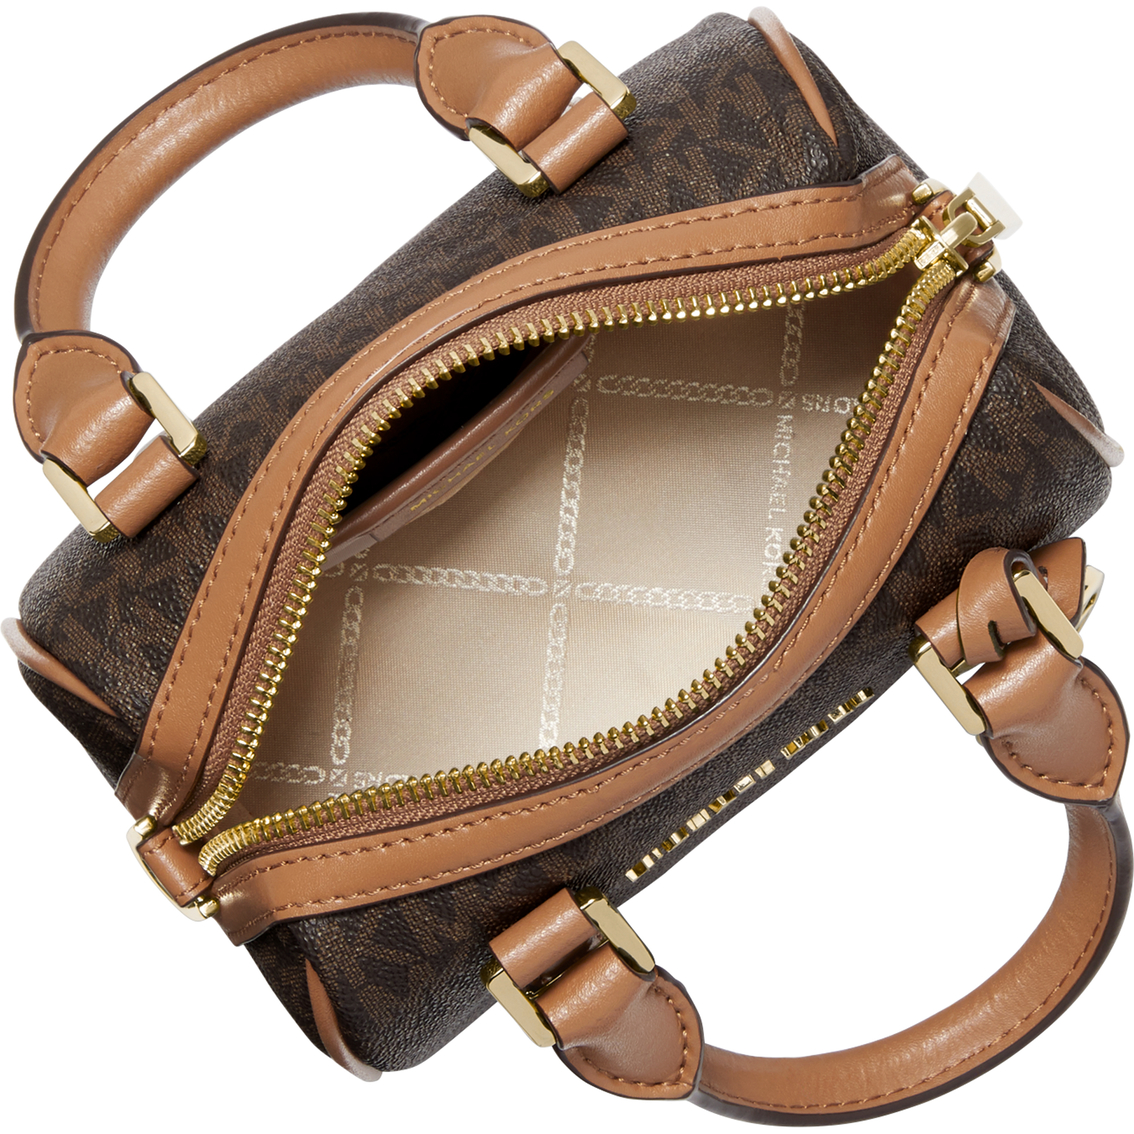 Michael Kors Bedford Legacy Extra Small Signature Duffle Crossbody, Crossbody Bags, Clothing & Accessories